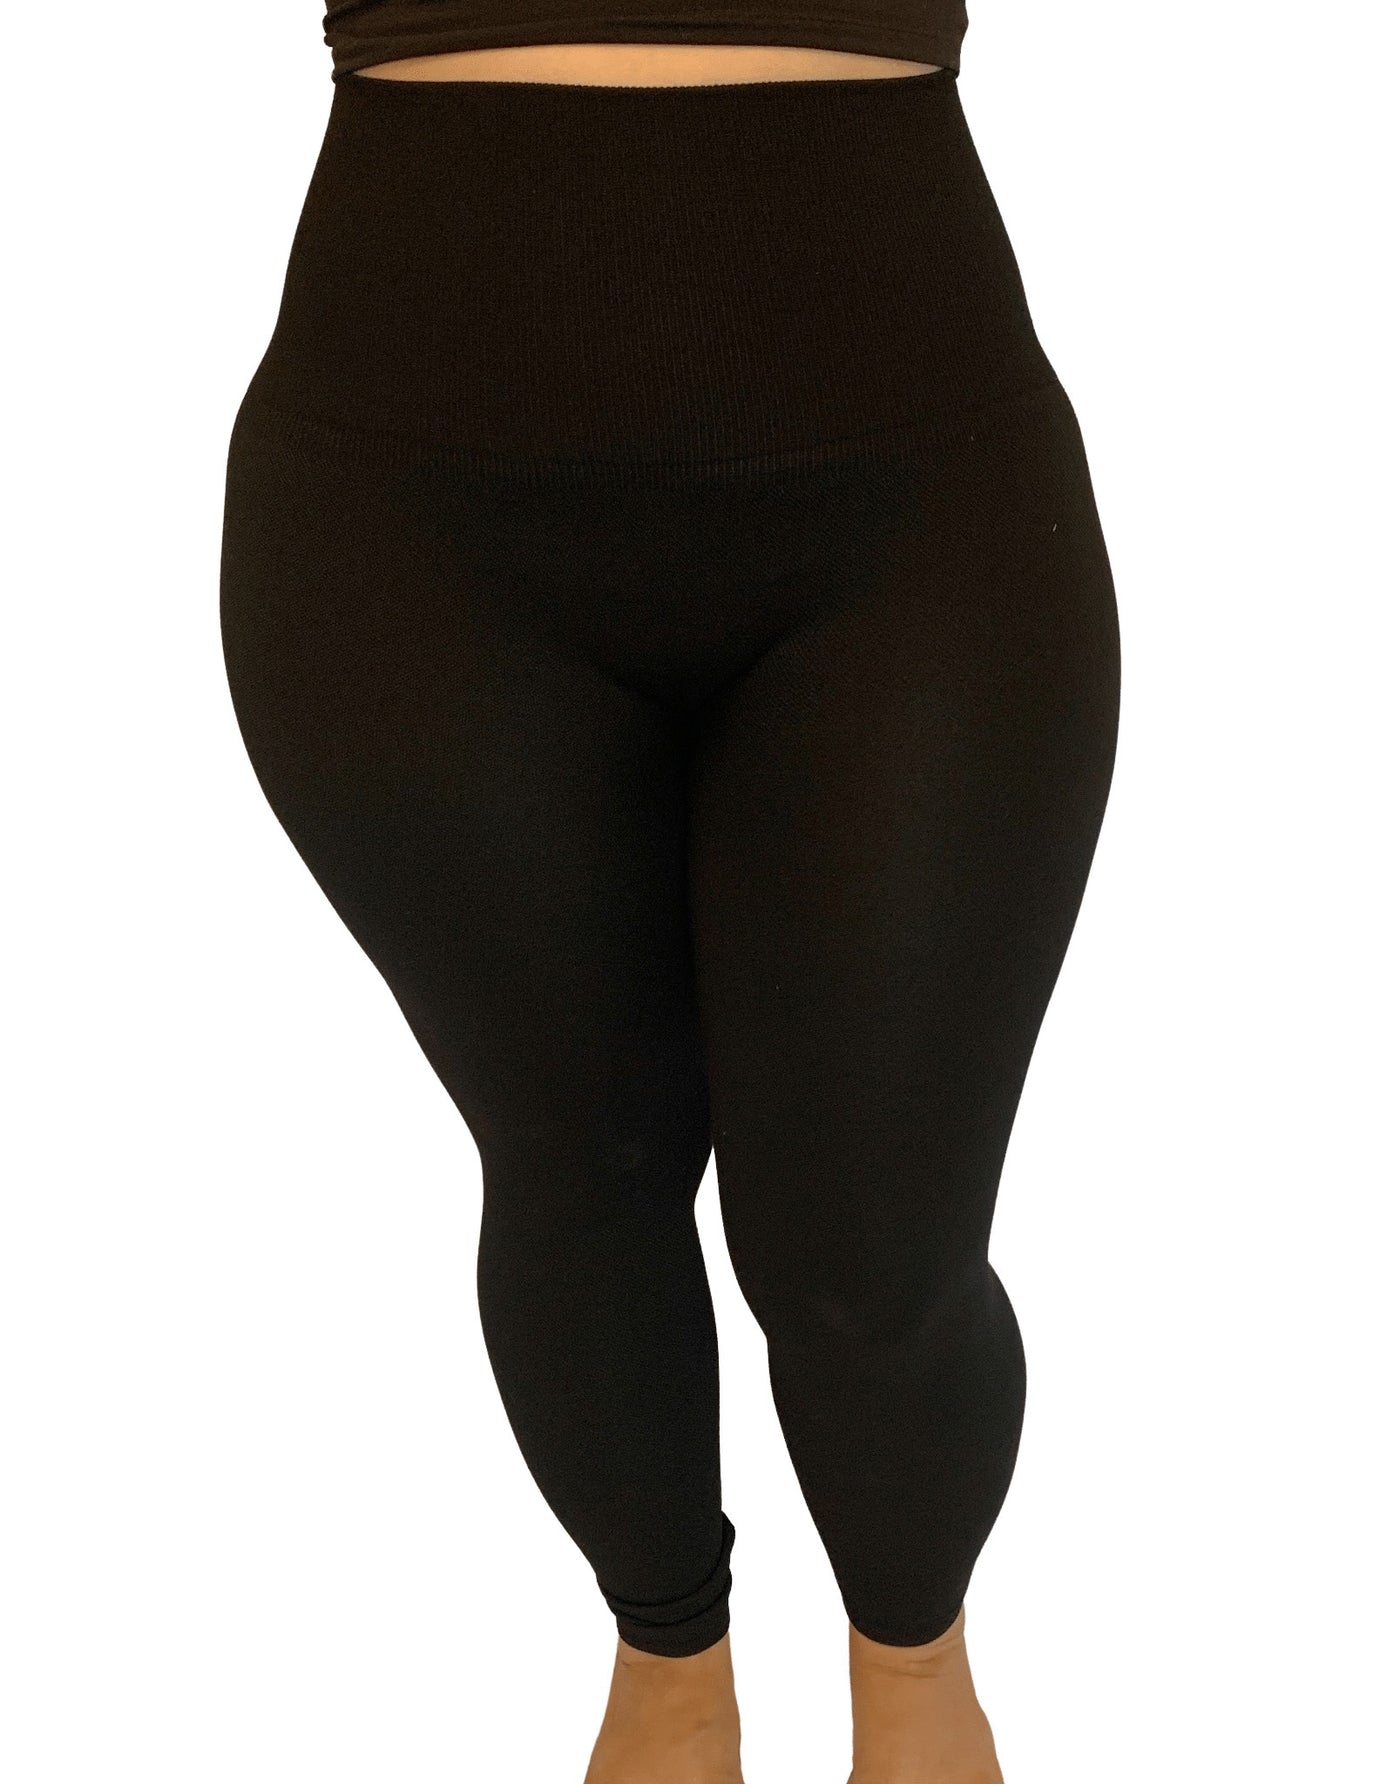 Hold Me Tight High Waist Compression Leggings